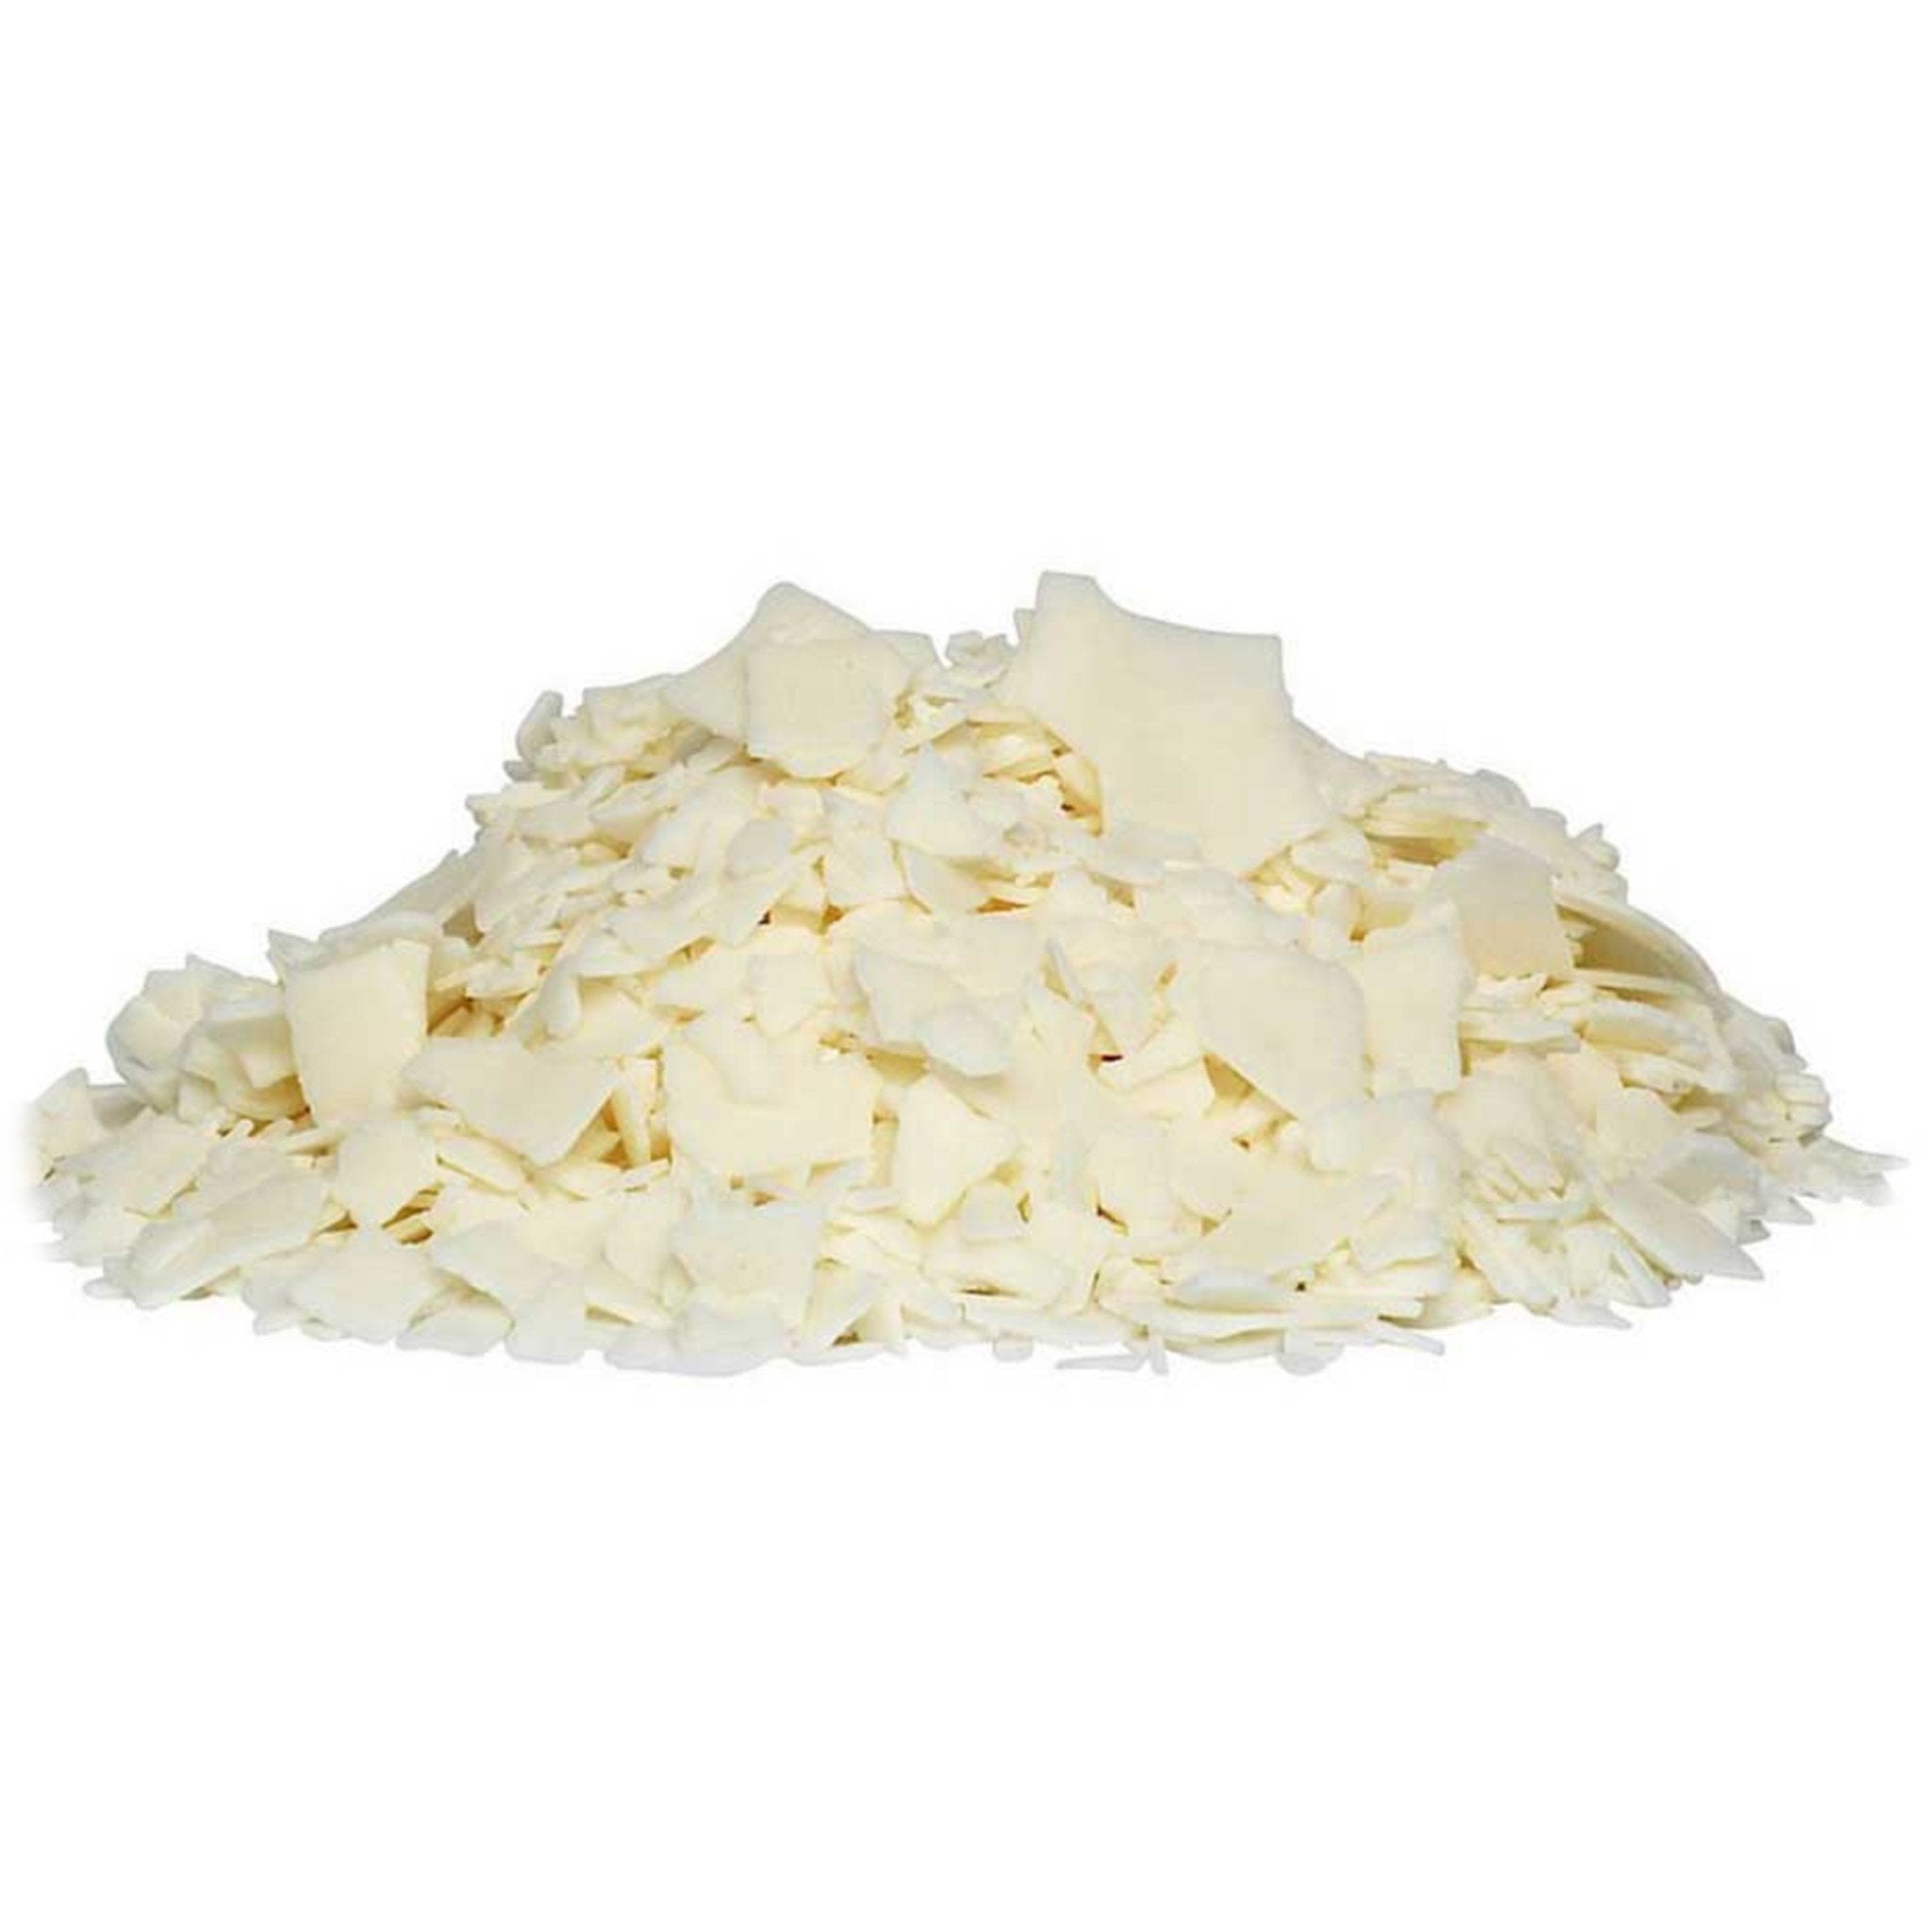 Wholesale Organic Soy Wax Flakes Soy Wax Flakes Bulk for Candle